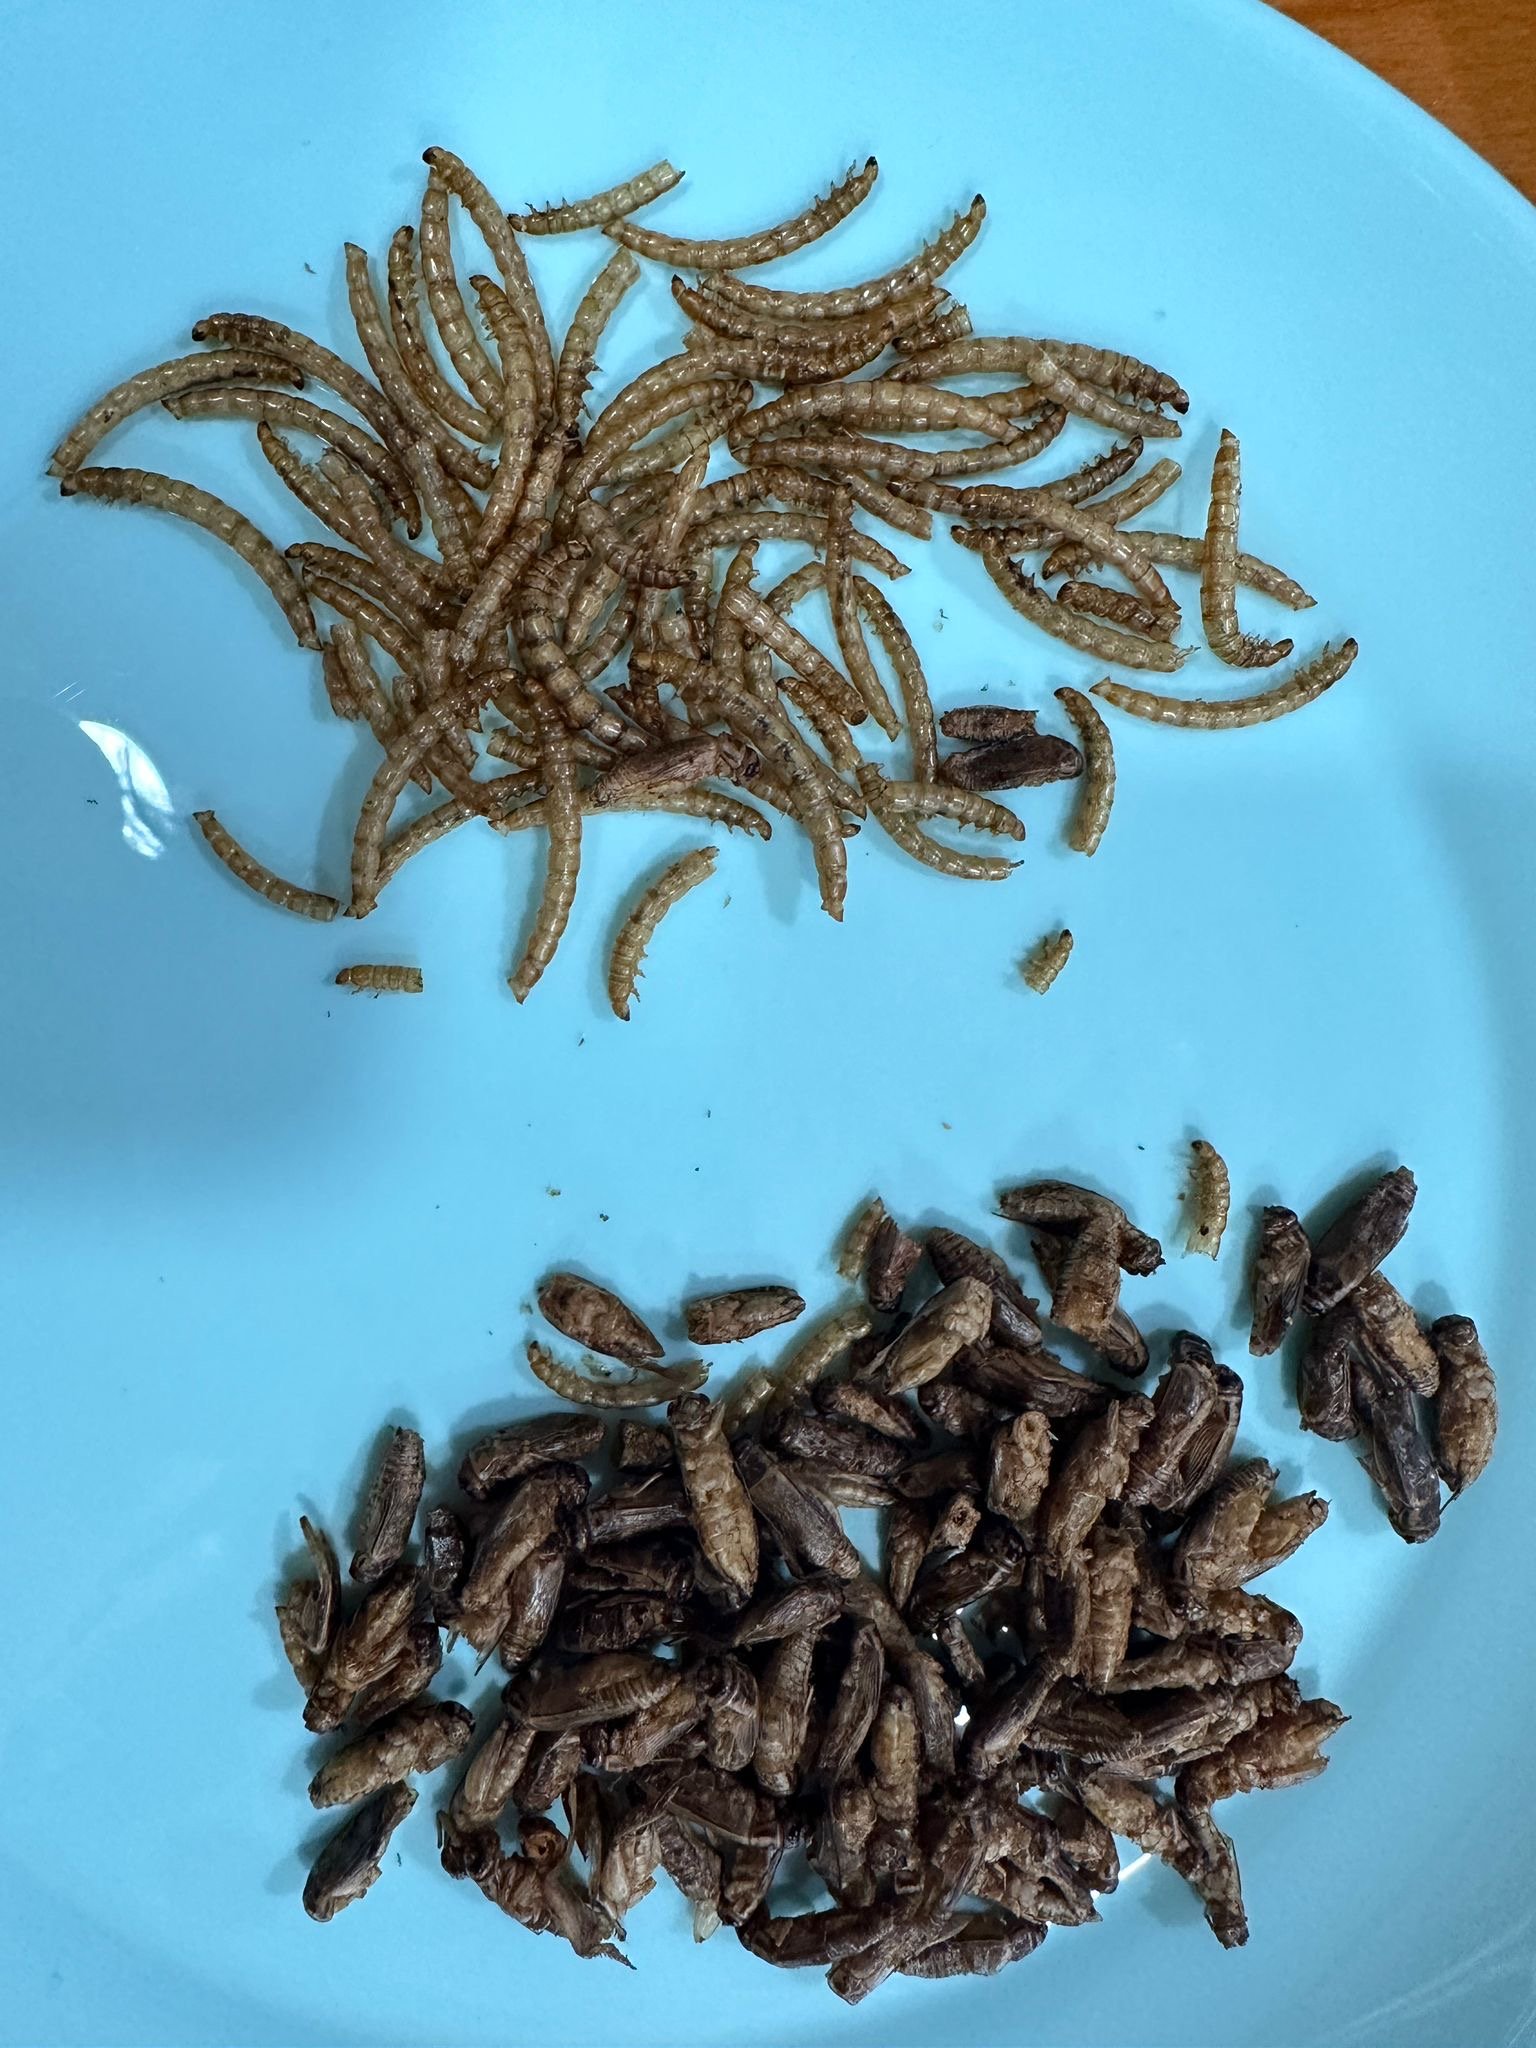 Insect snacks in Singapore